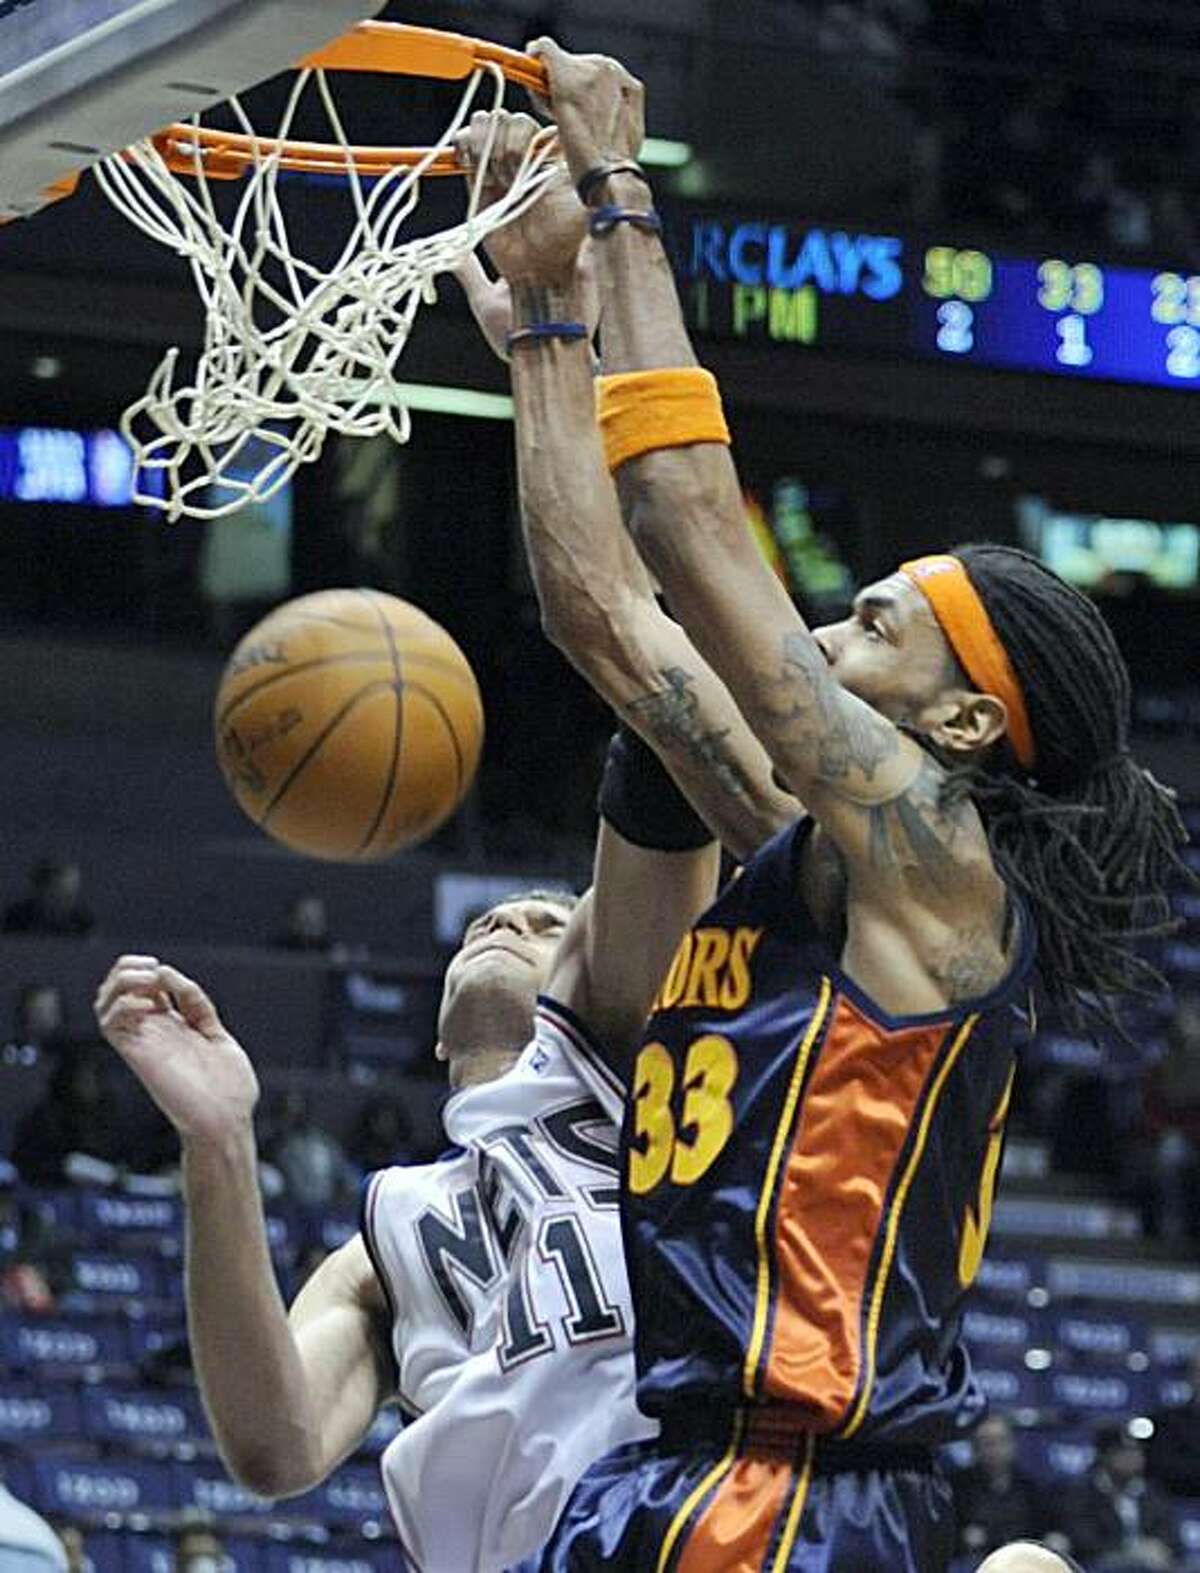 Golden State Warriors' Mikki Moore, right, dunks the ball over New Jersey Nets' Brook Lopez during the fourth quarter of an NBA basketball game Wednesday, Dec. 9, 2009 in East Rutherford, N.J. The Warriors beat the Nets 105-89. (AP Photo/Bill Kostroun)